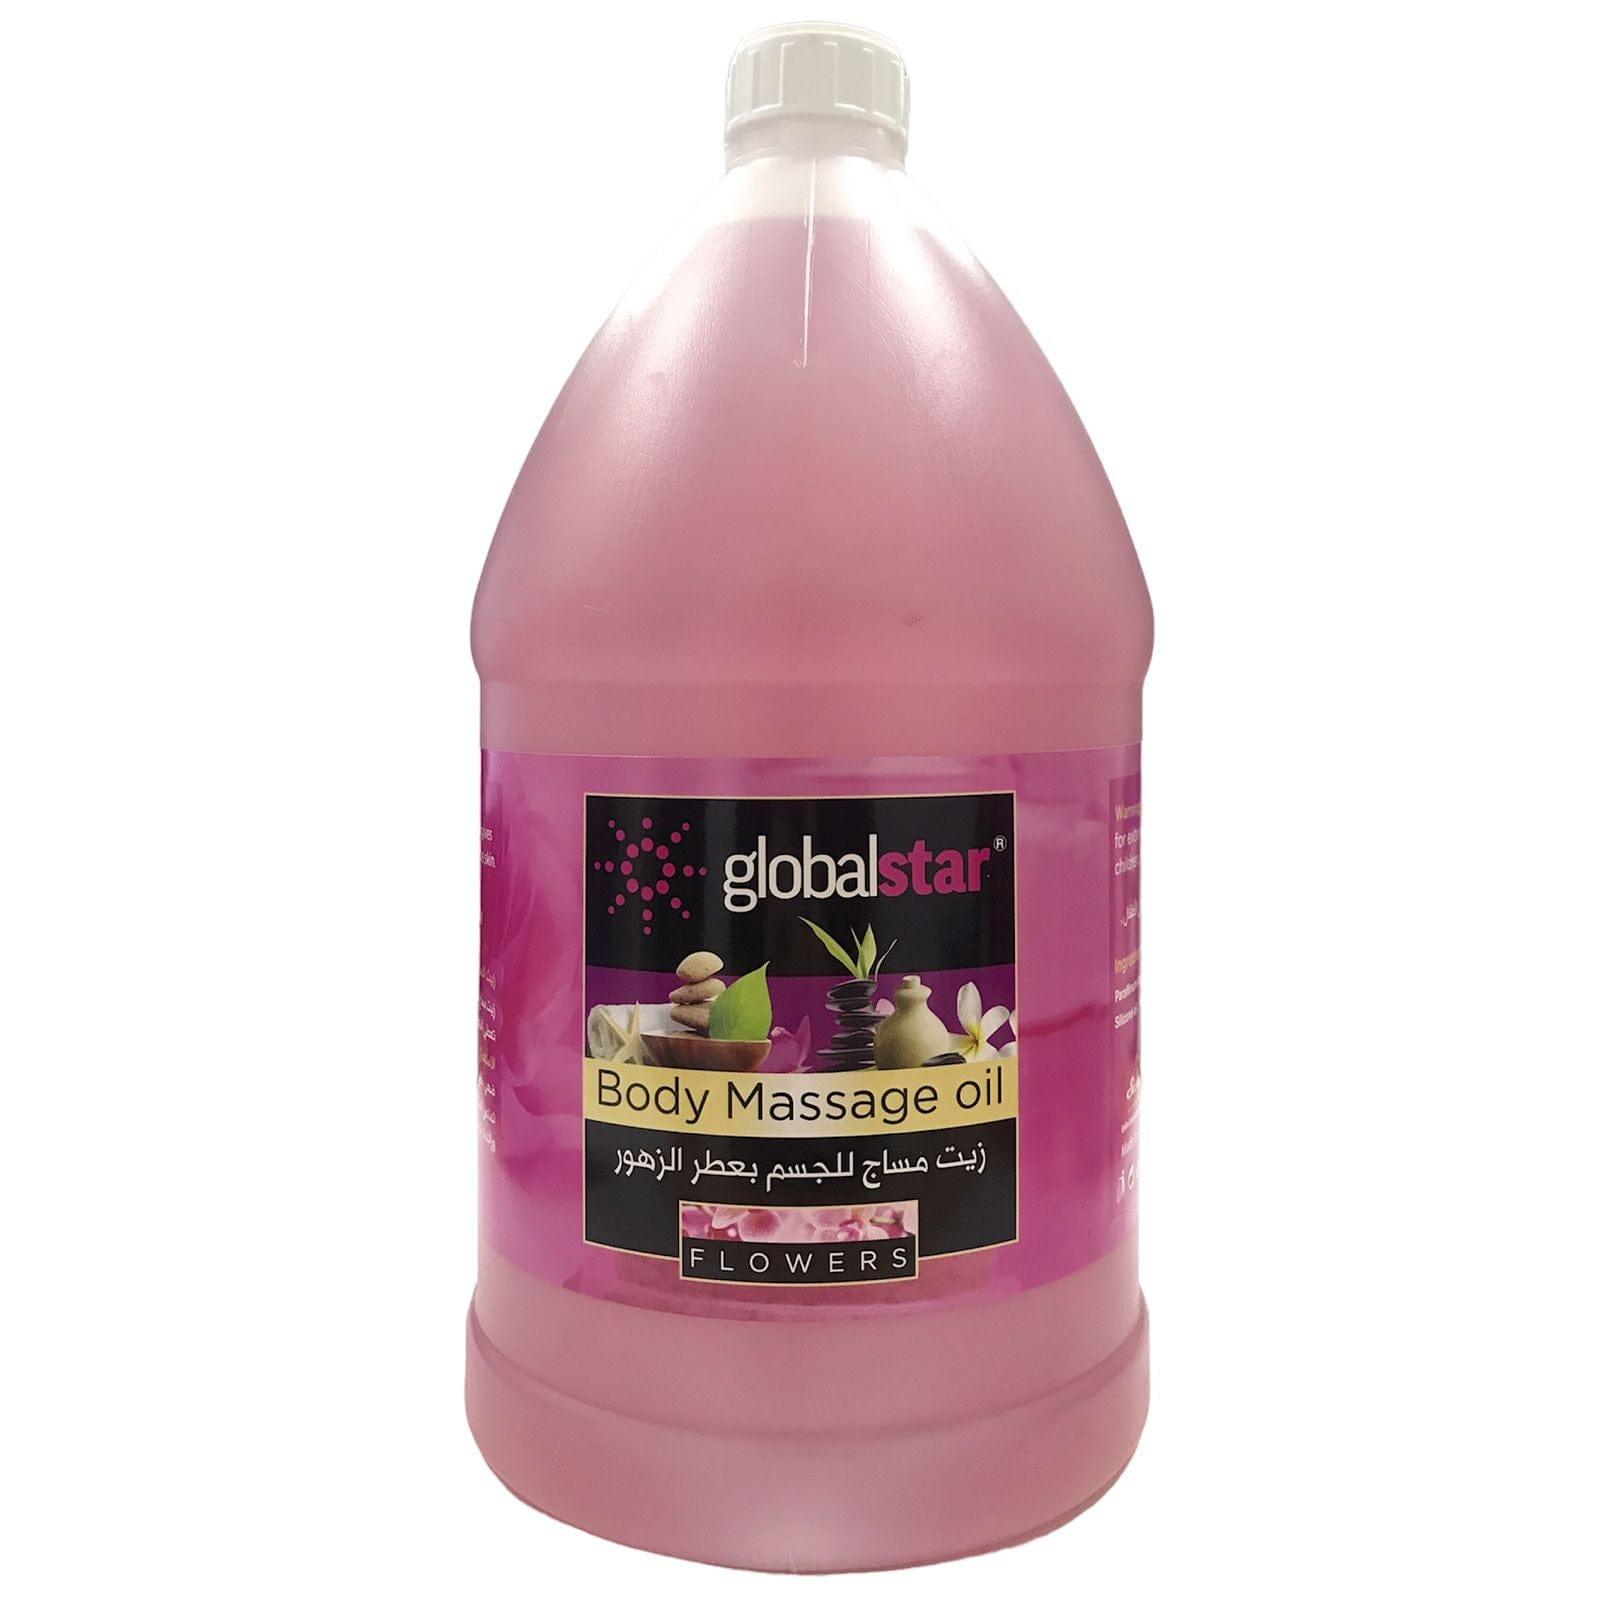 Globalstar Body Massage Oil Flowers Extract 3.8L